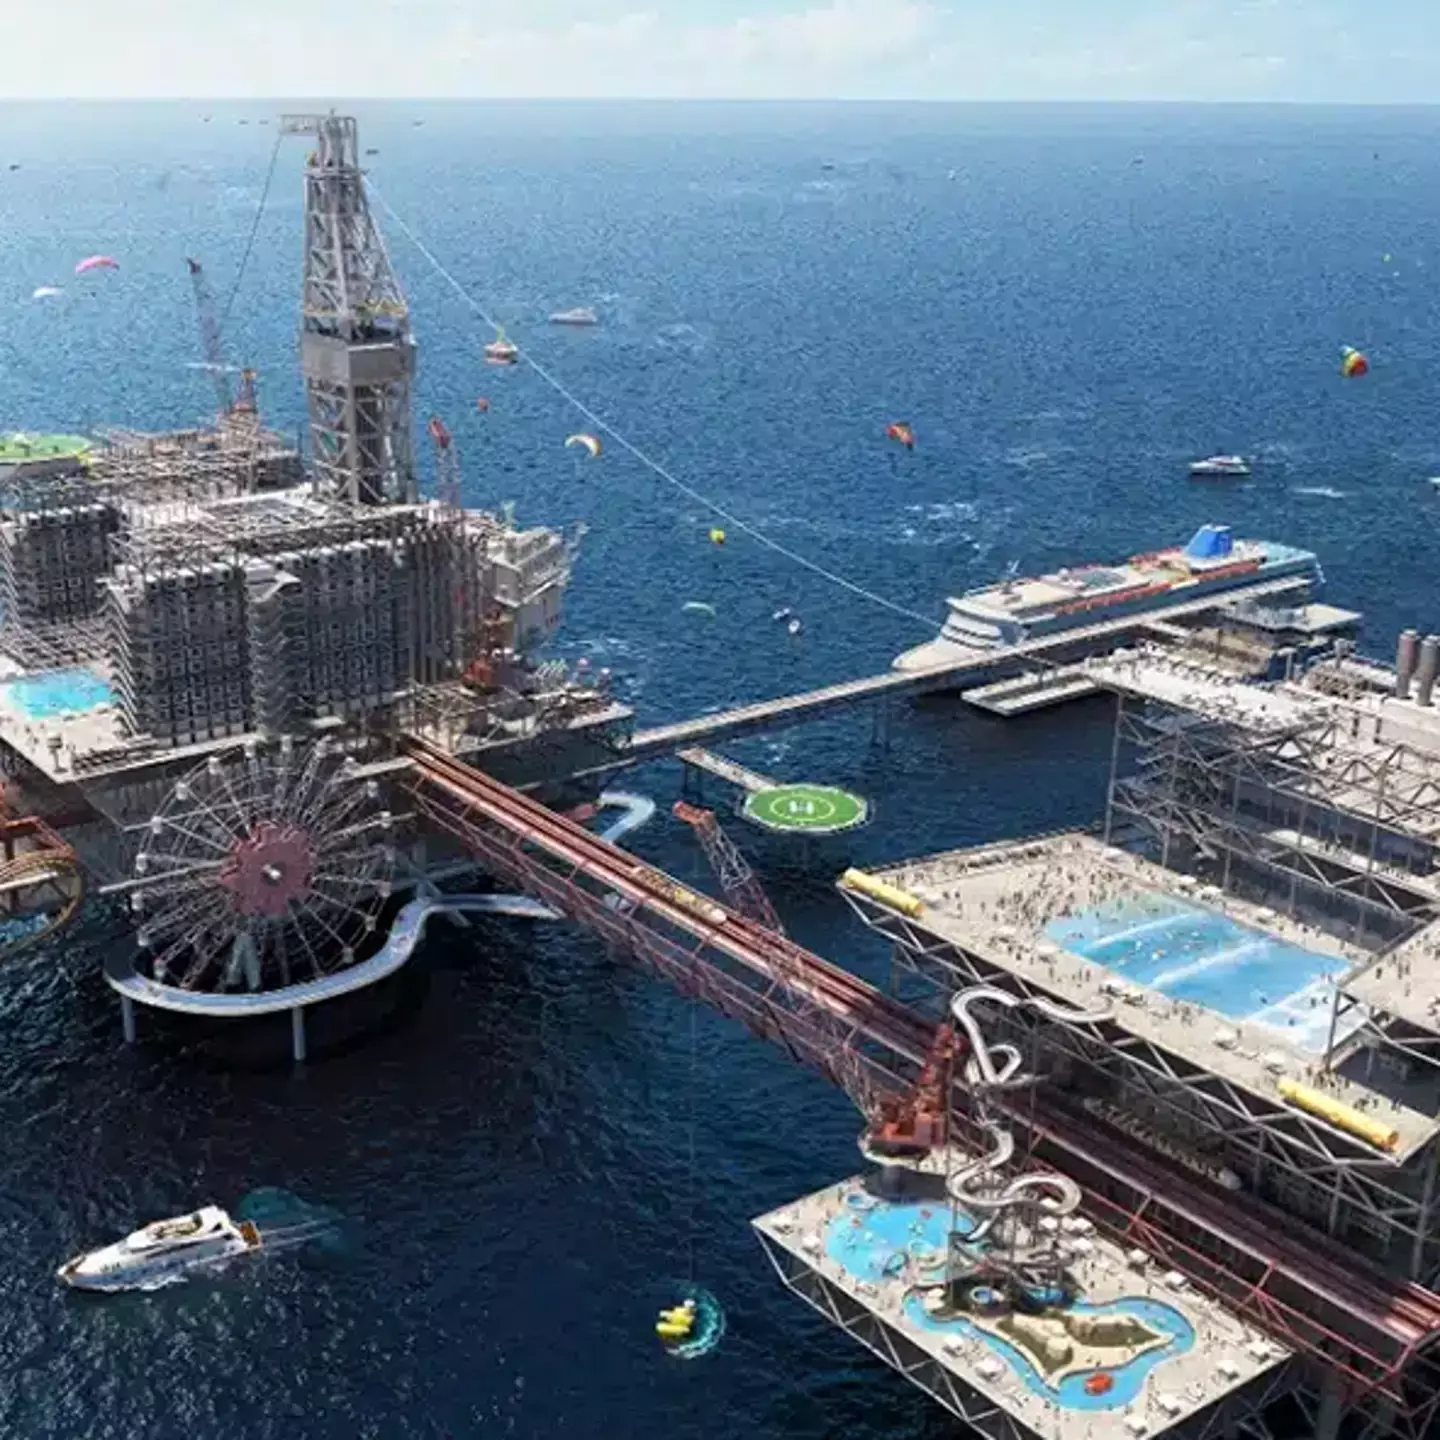 Inside world’s first floating theme park built on an old oil rig